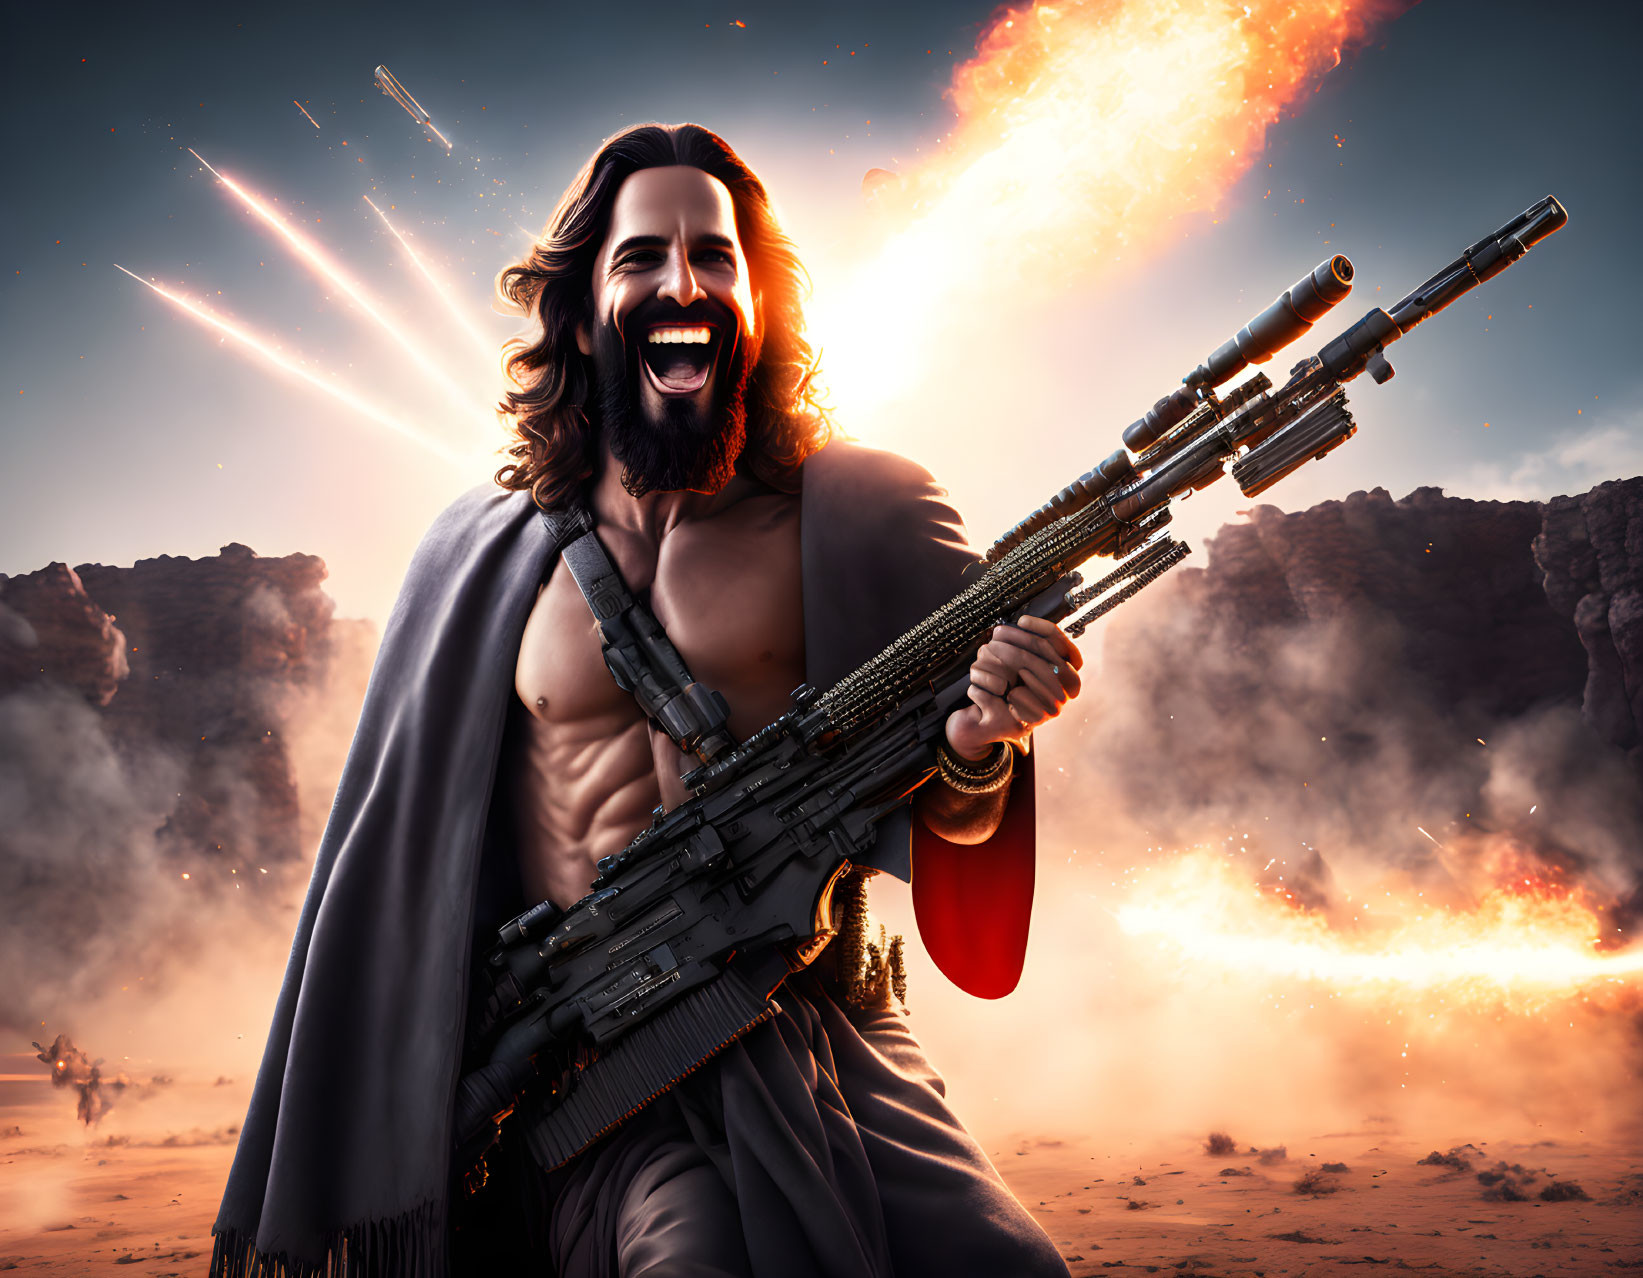 Bearded man with rifle and cape in fiery background